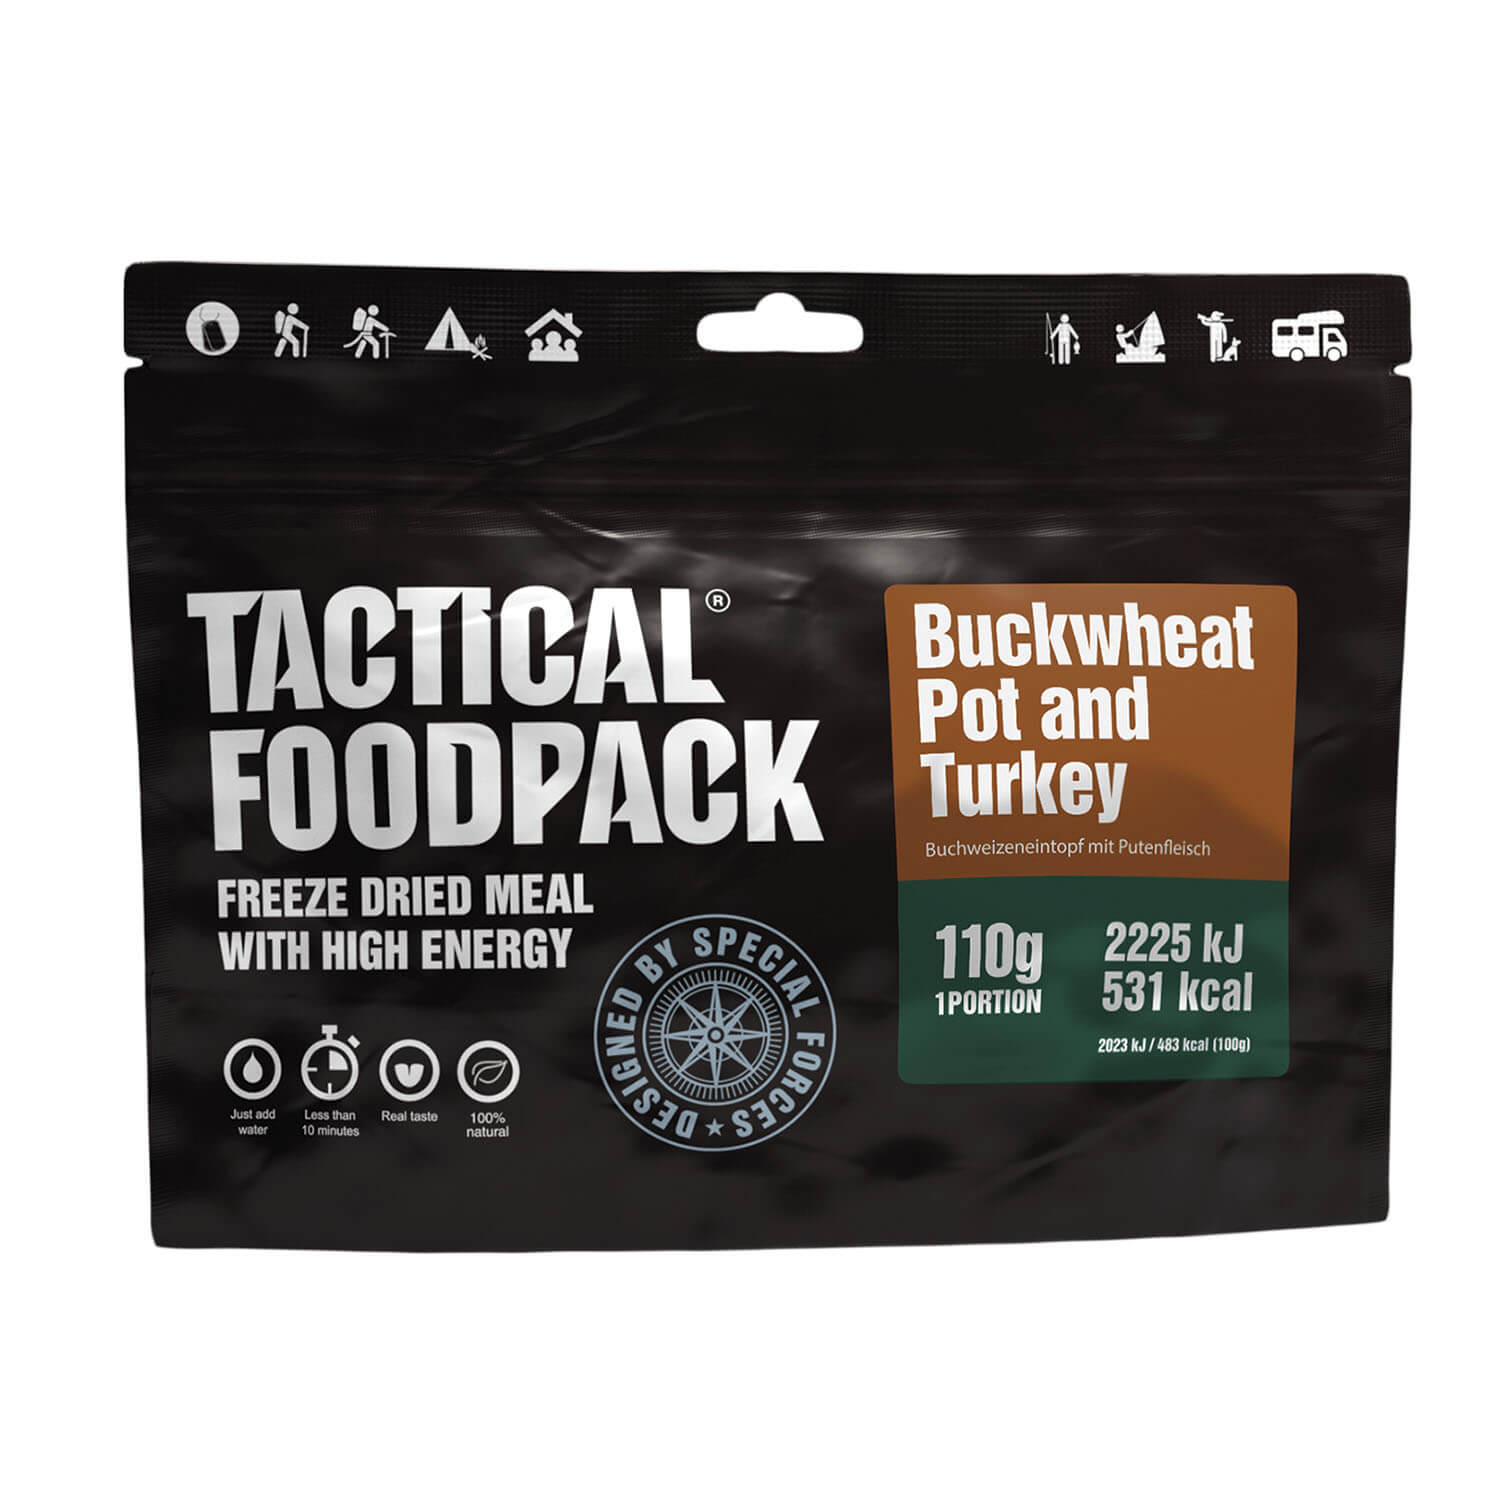 Tactical Foodpack Buckwheat Pot and Turkey - Outdoor Kitchen